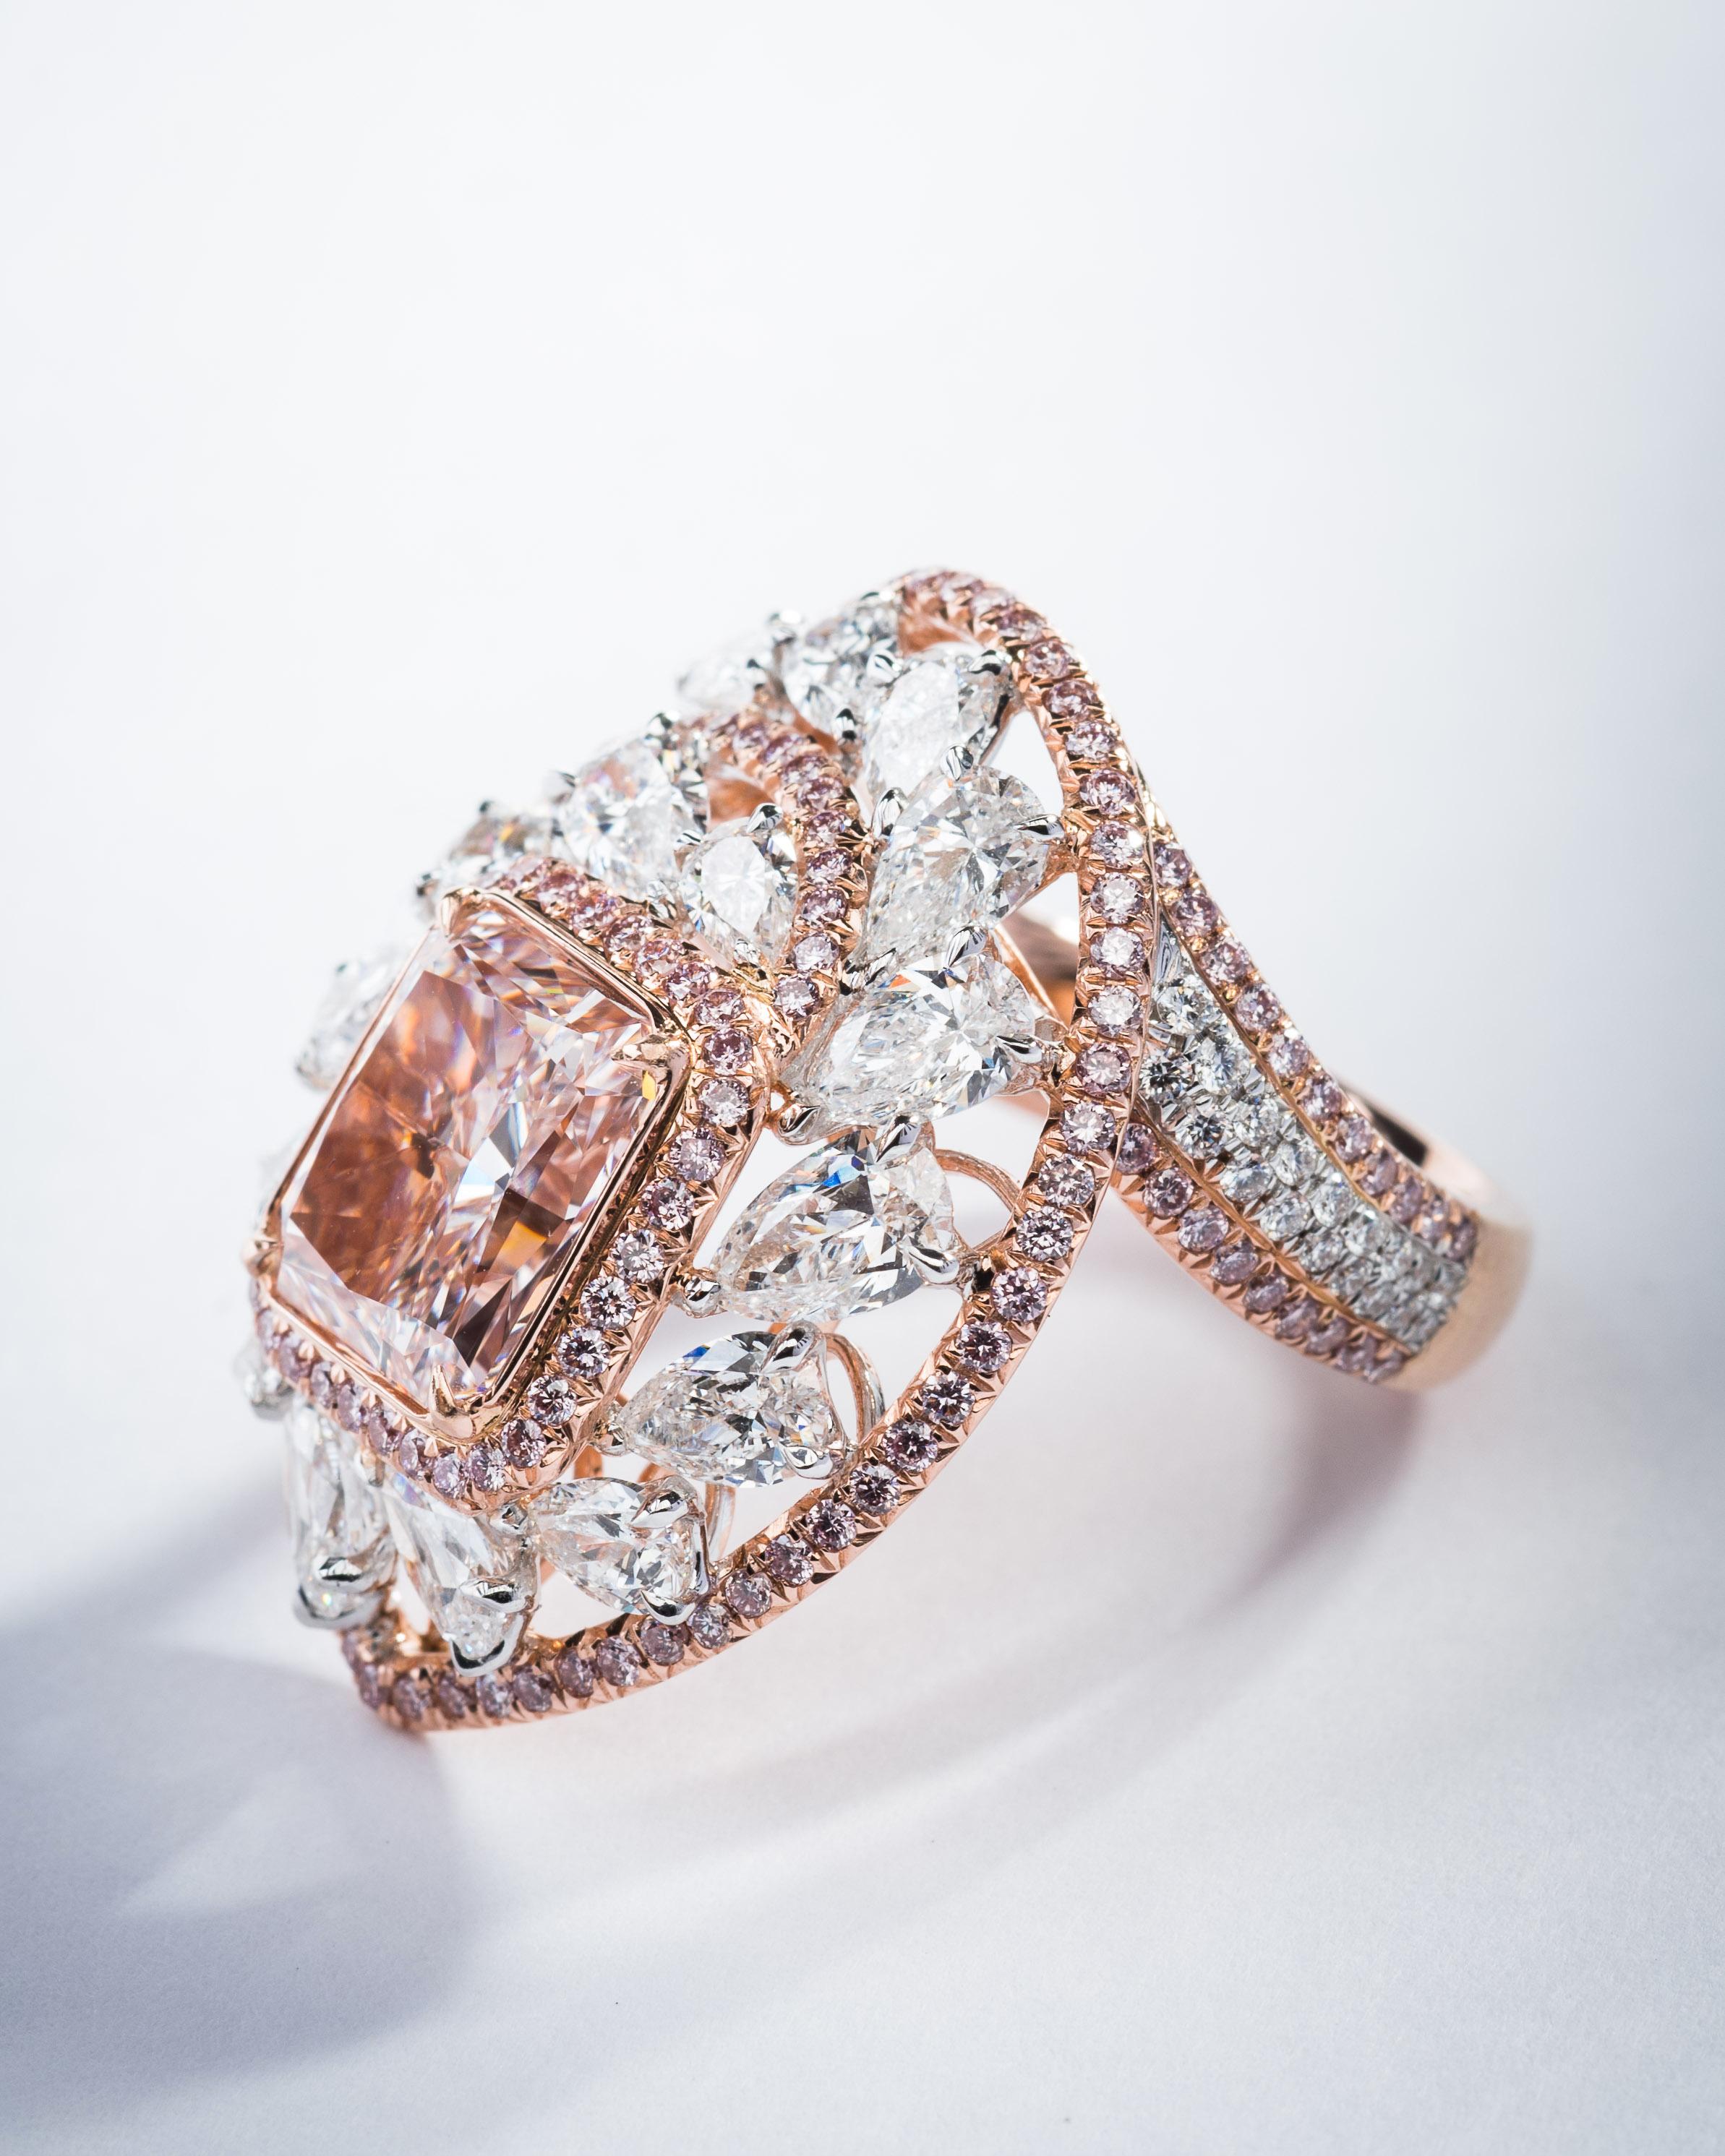 Contemporary GIA Certified 6.23 Carat Light Pink Radiant Diamond Ring in 18k Rose Gold For Sale